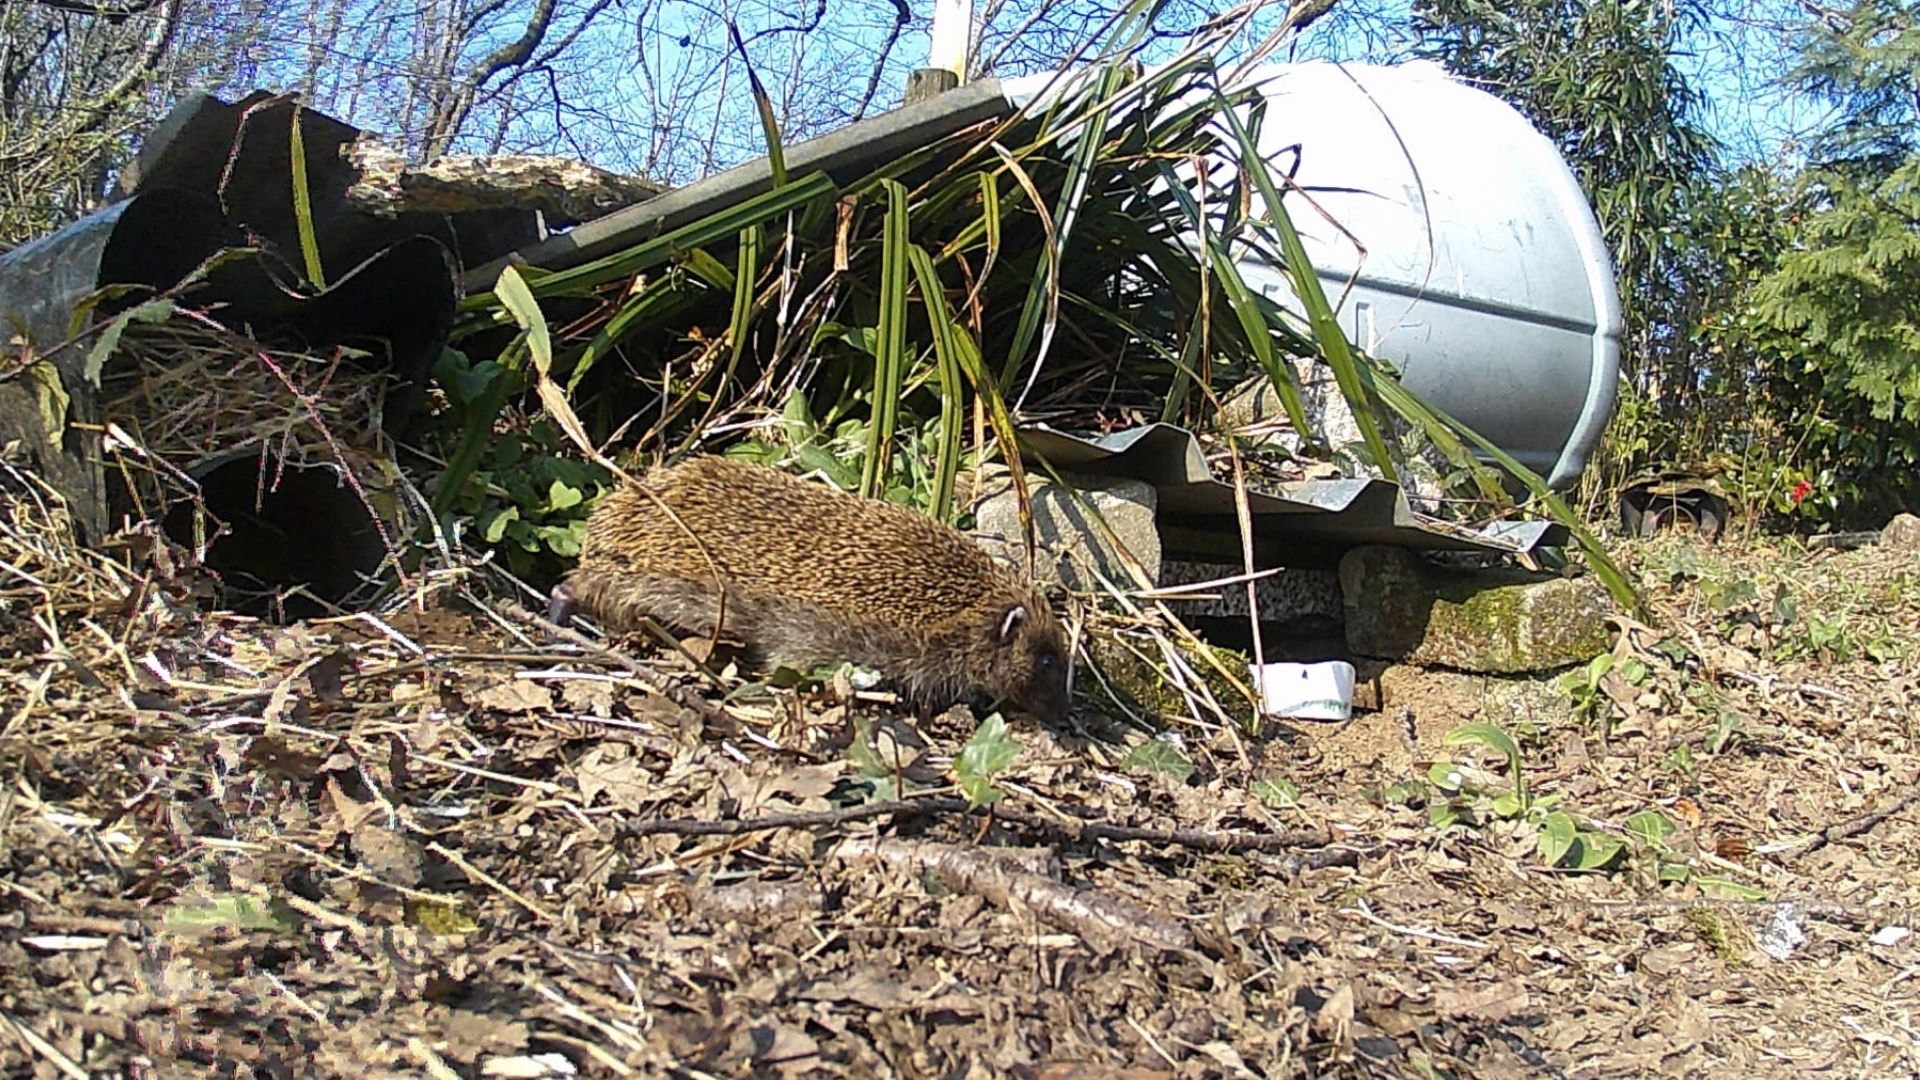 Our first rehabilitated hedgehog has been released back into the wild!